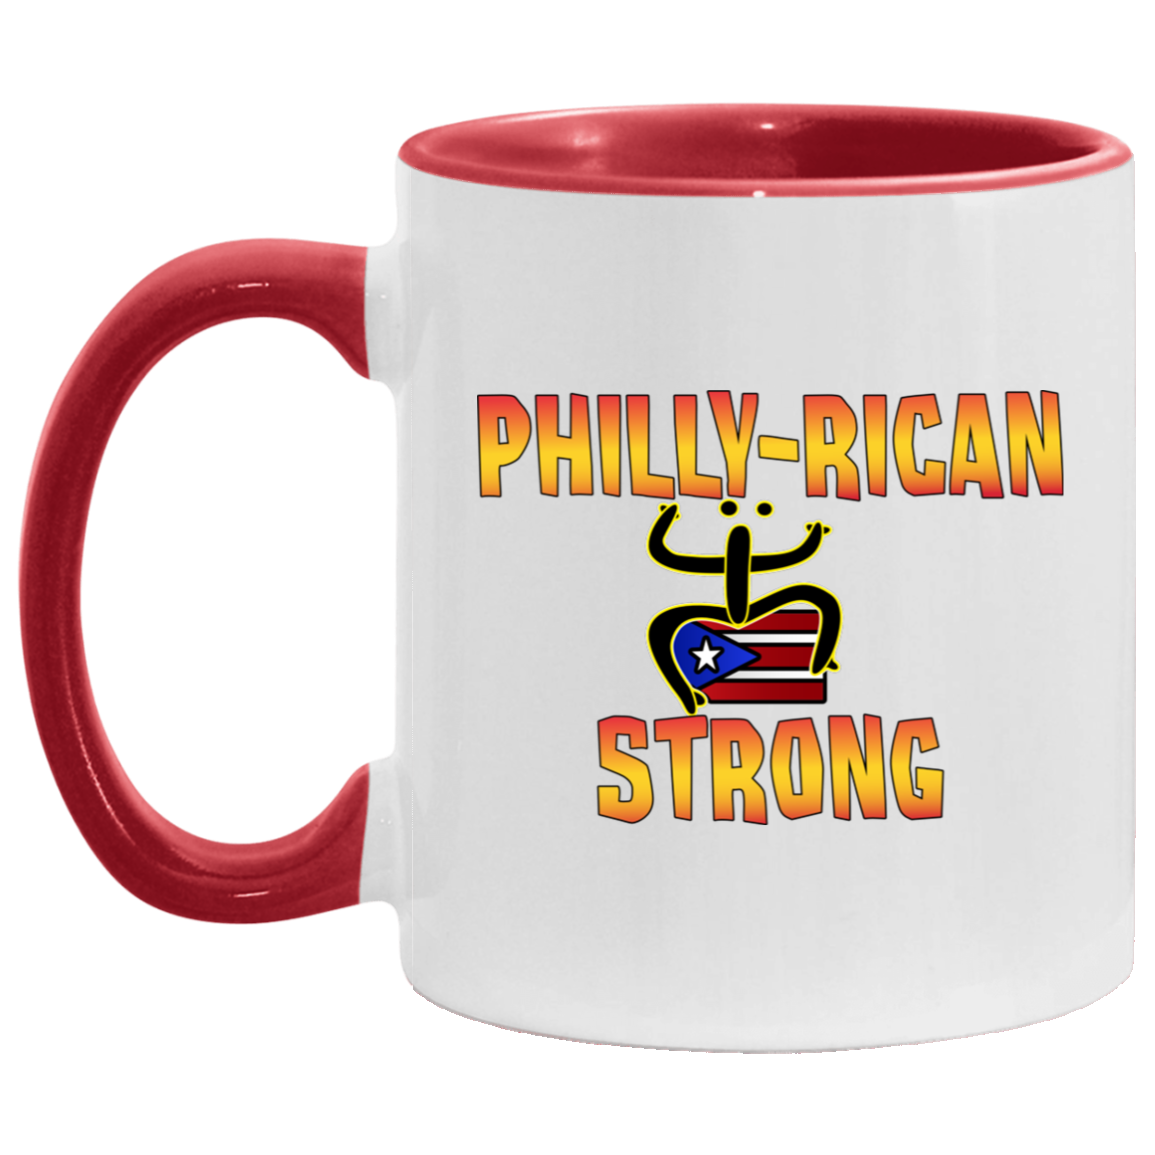 Philly-Rican Strong 11OZ Accent Mug - Puerto Rican Pride